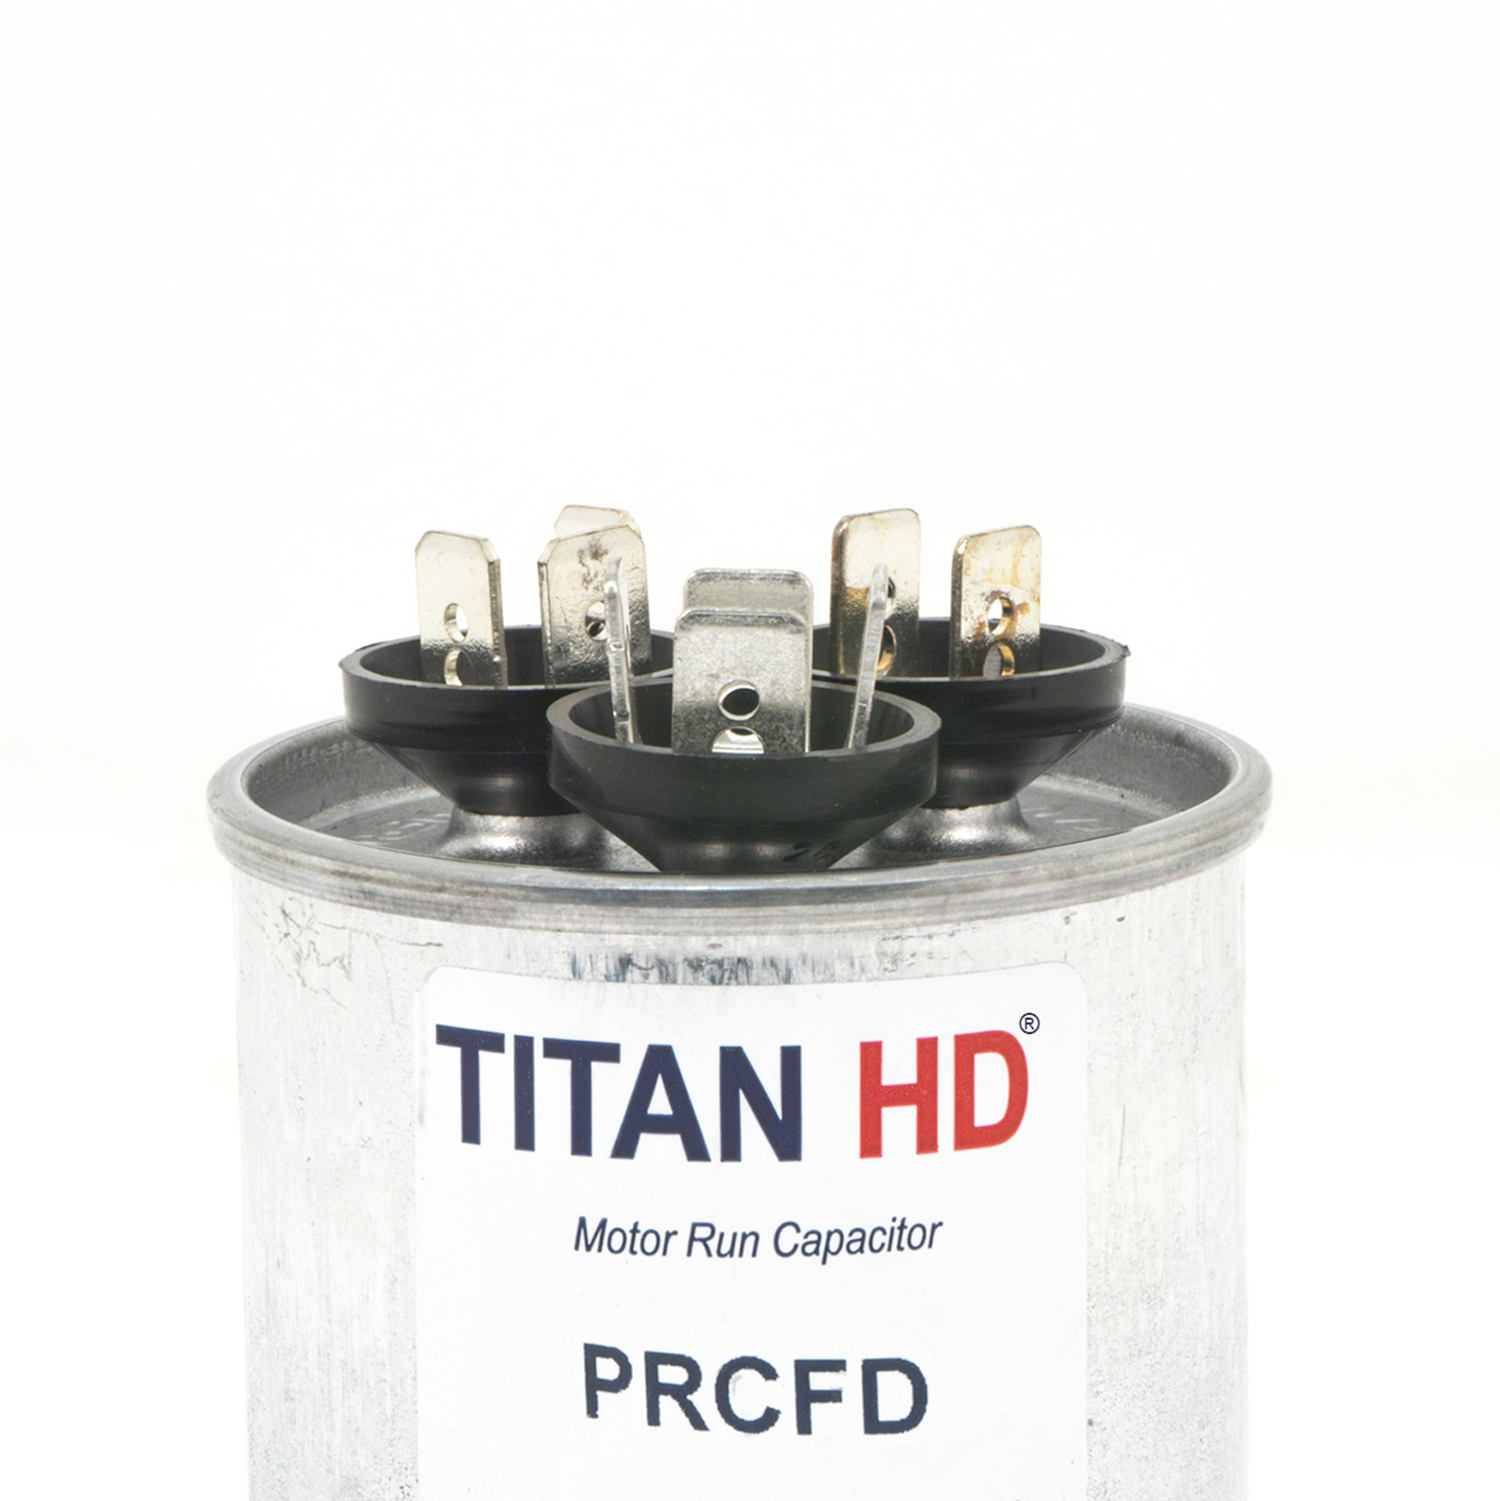 Prcfd355a Packard TITAN HD Run Capacitor Round 35 5 MFD 440-370v for sale online 